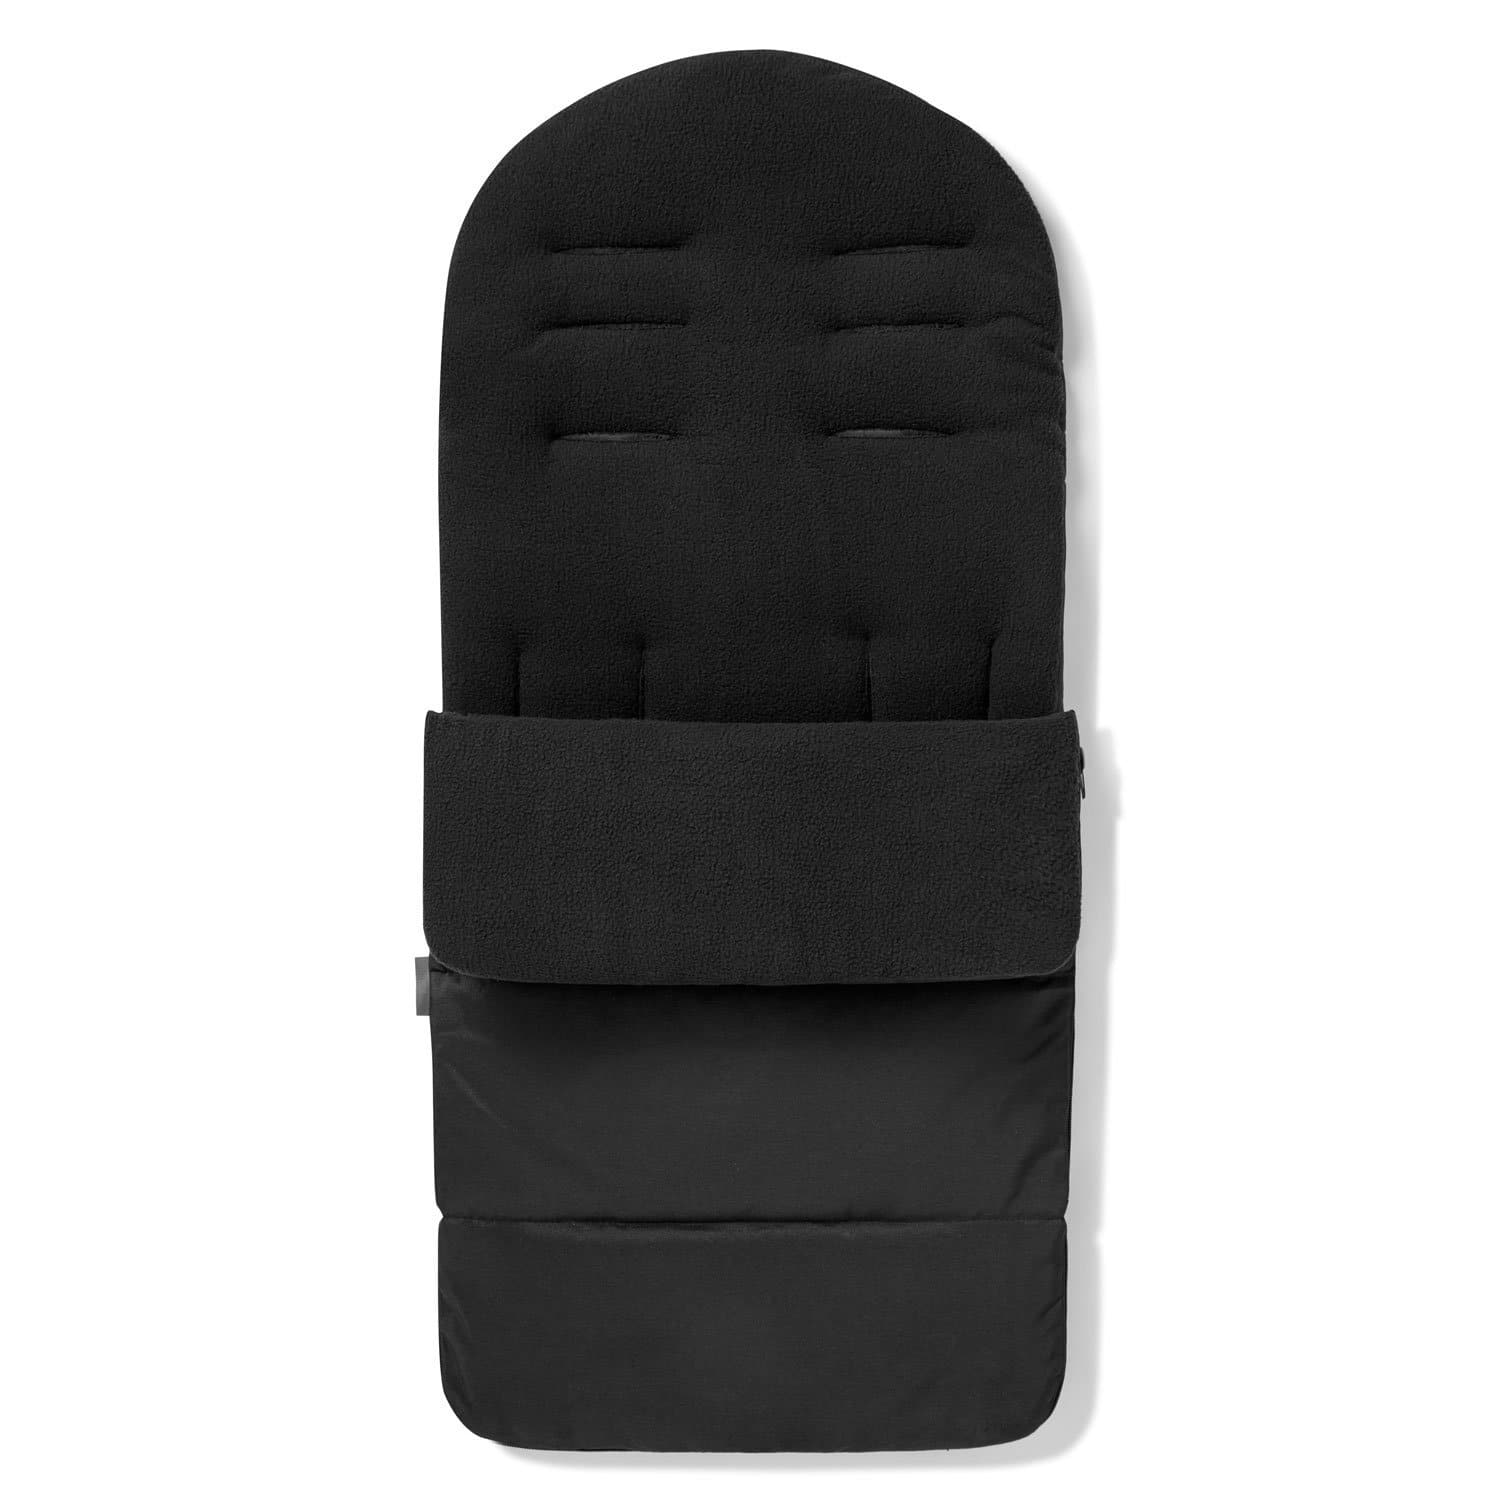 Premium Footmuff / Cosy Toes Compatible with Babybus - Black Jack / Fits All Models | For Your Little One